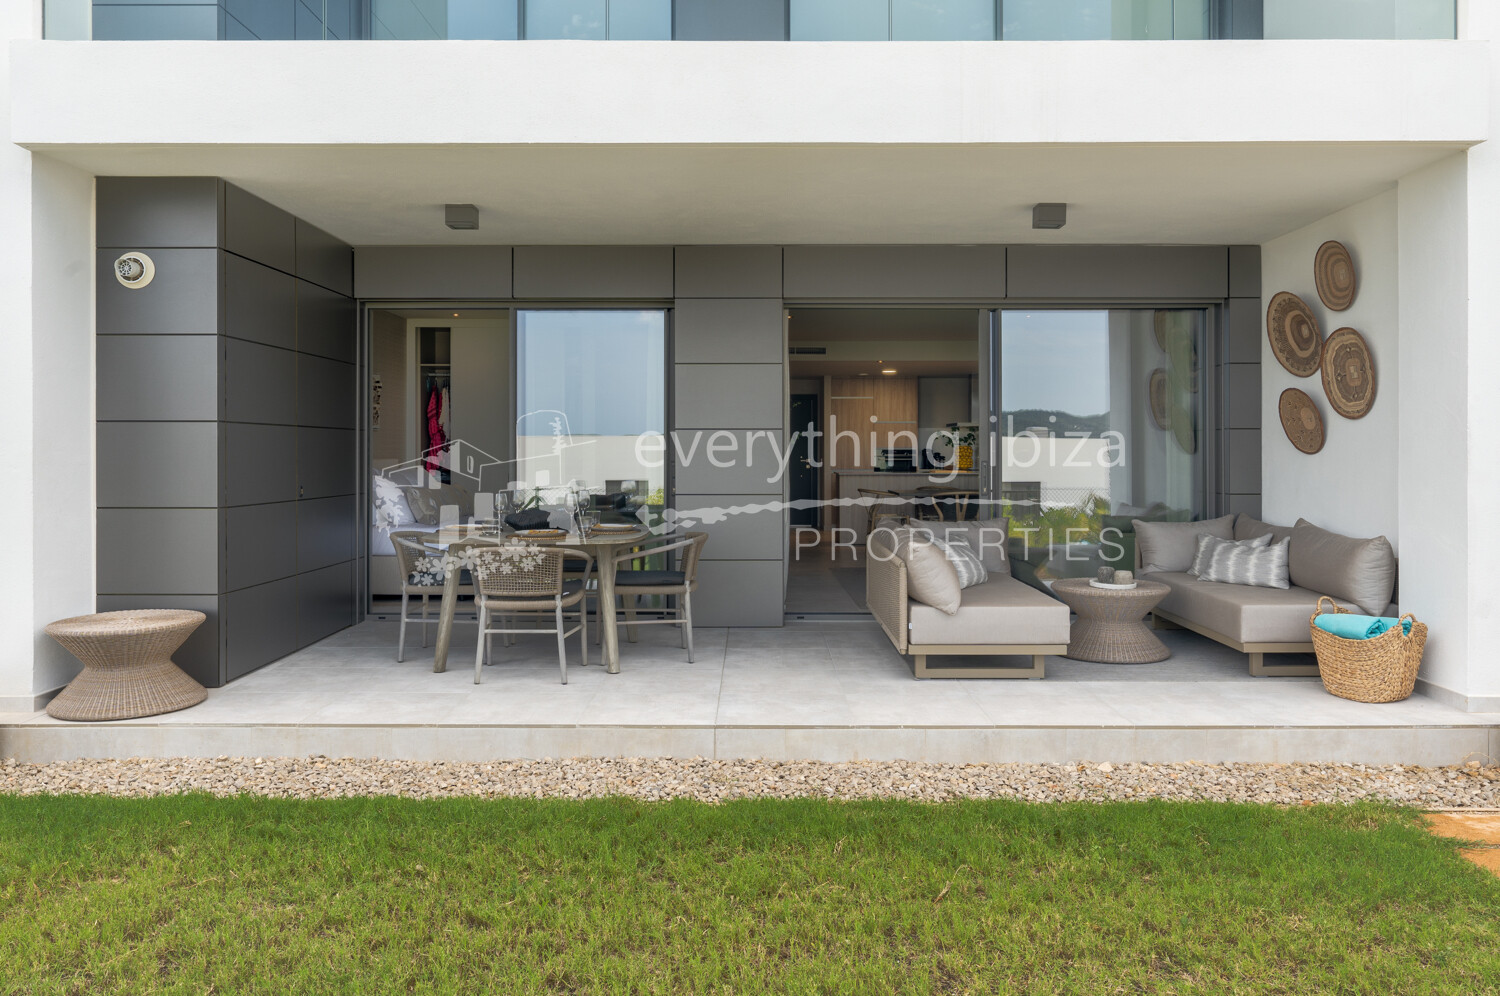 Beautiful Contemporary 2 Bed Apartment with Garden & Impressive Views, ref. 1727, for sale in Ibiza by everything ibiza Properties